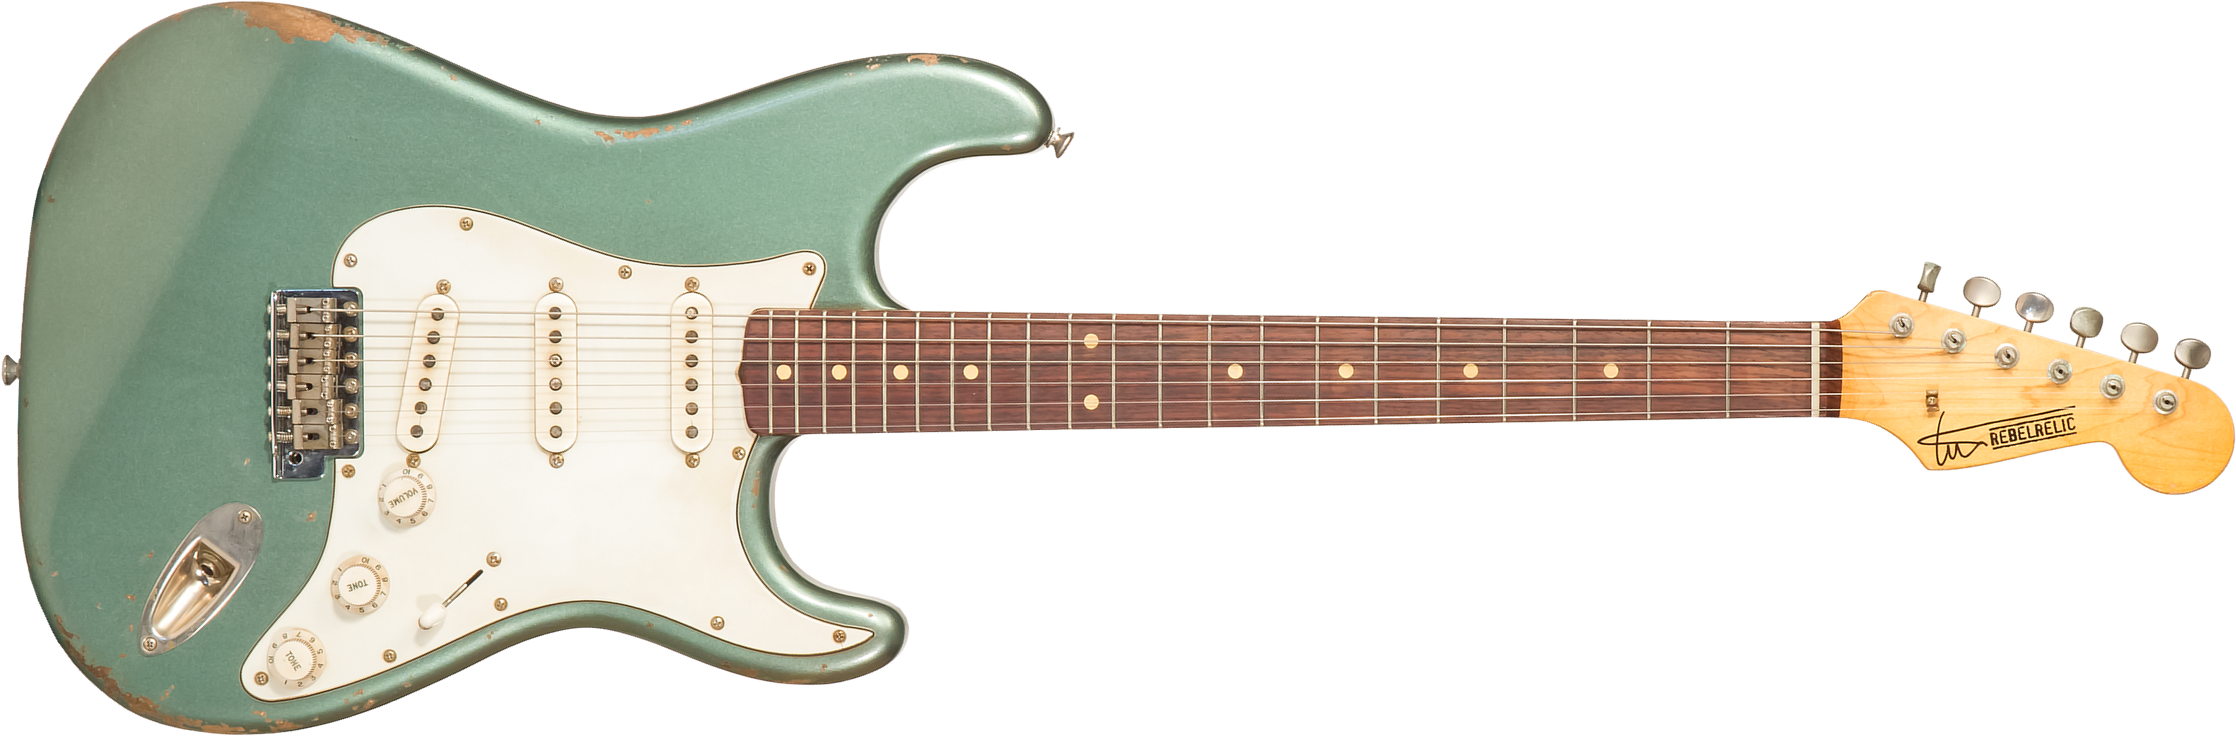 Rebelrelic S-series 62 3s Trem Rw #230203 - Light Aged Sherwood Forest Green - Str shape electric guitar - Main picture